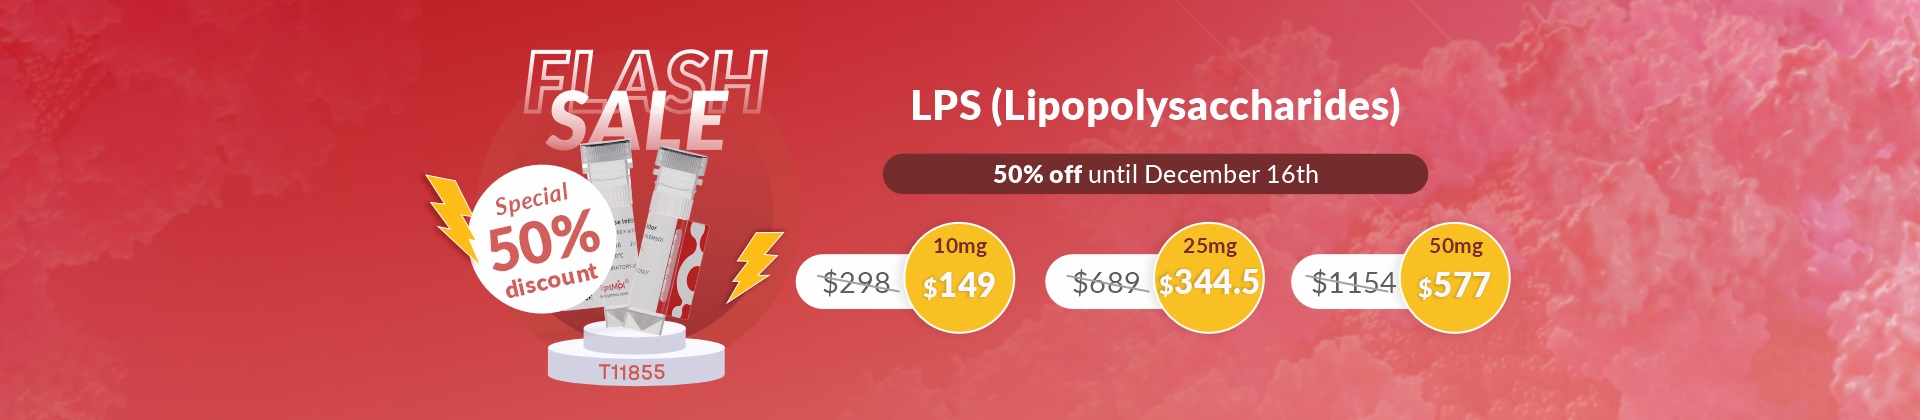 LPS Special 50% discount